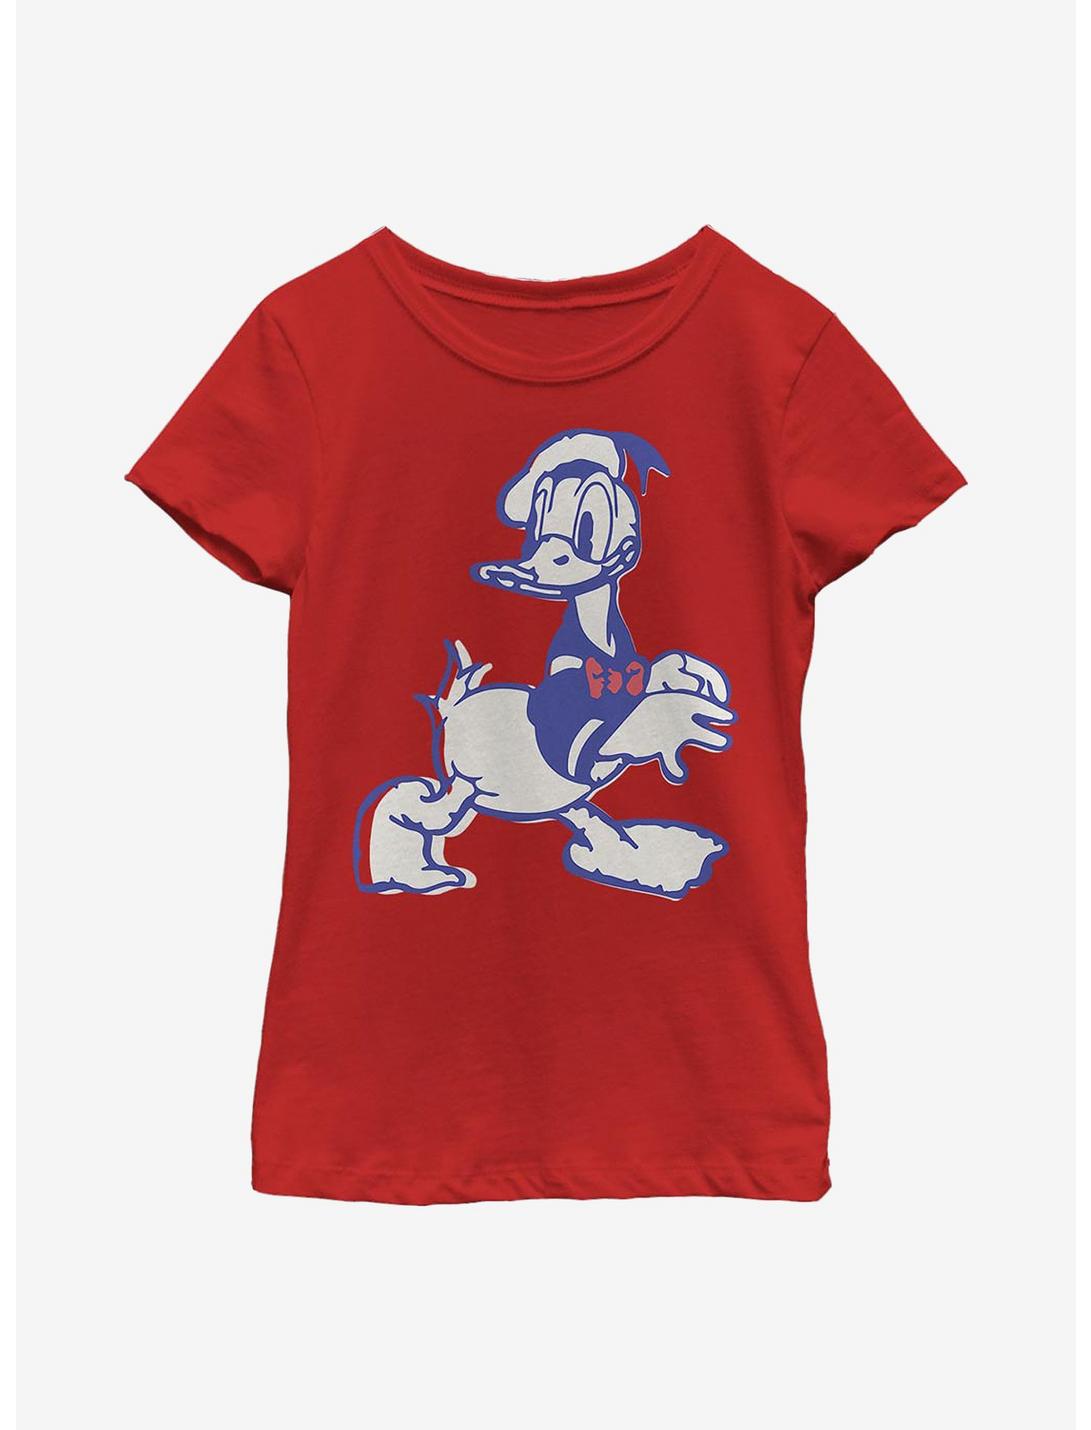 Disney Donald Duck Heritage Youth Girls T-Shirt, RED, hi-res